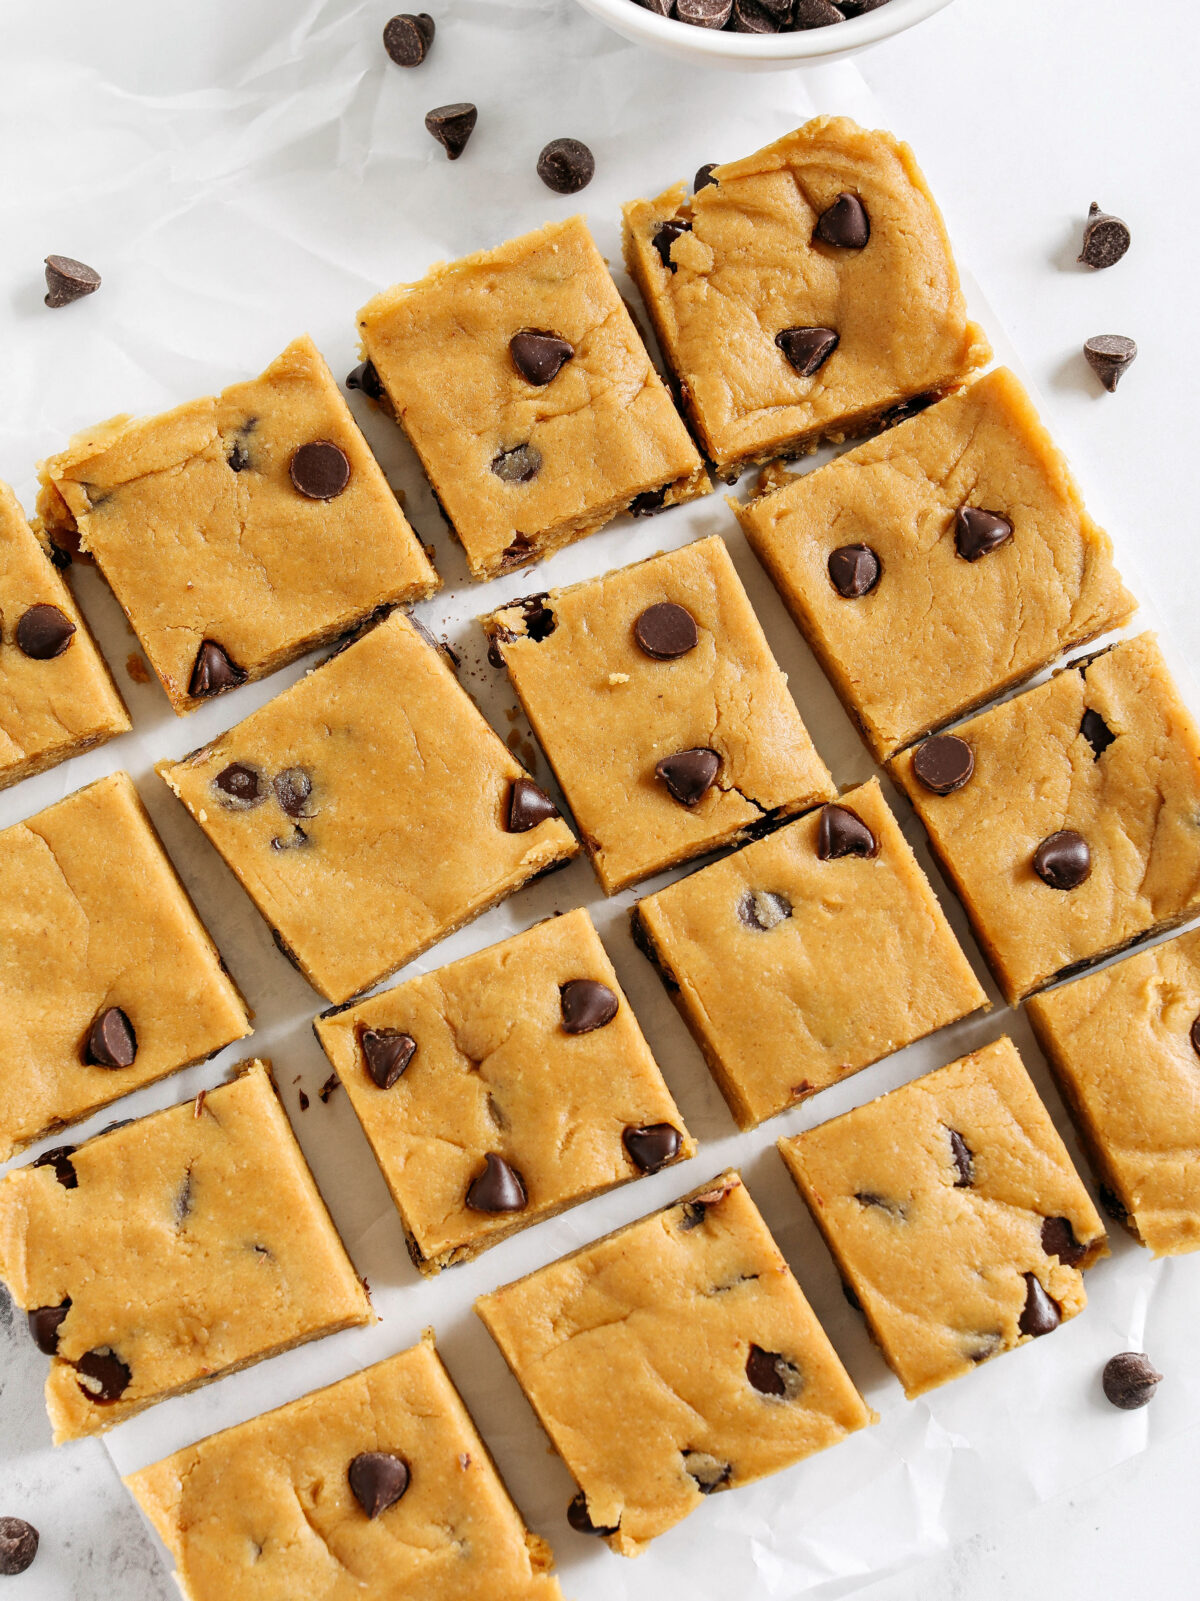 These EASY Peanut Butter Protein Bars are healthy, delicious and made with just a few simple ingredients with zero baking required!  They come together in under 10 minutes!